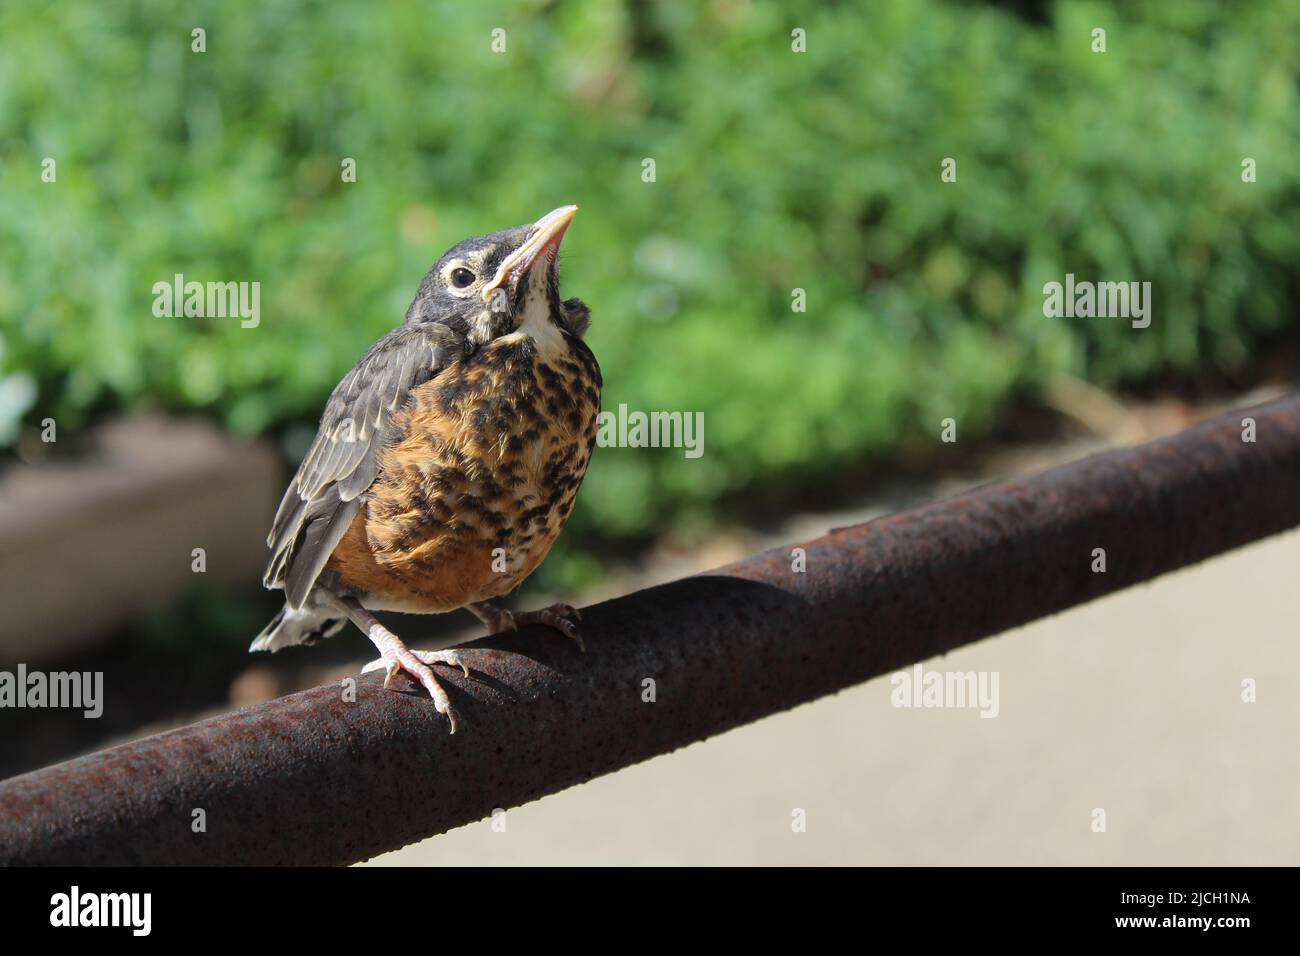 a robin in Ohio perched on a metal fence Stock Photo